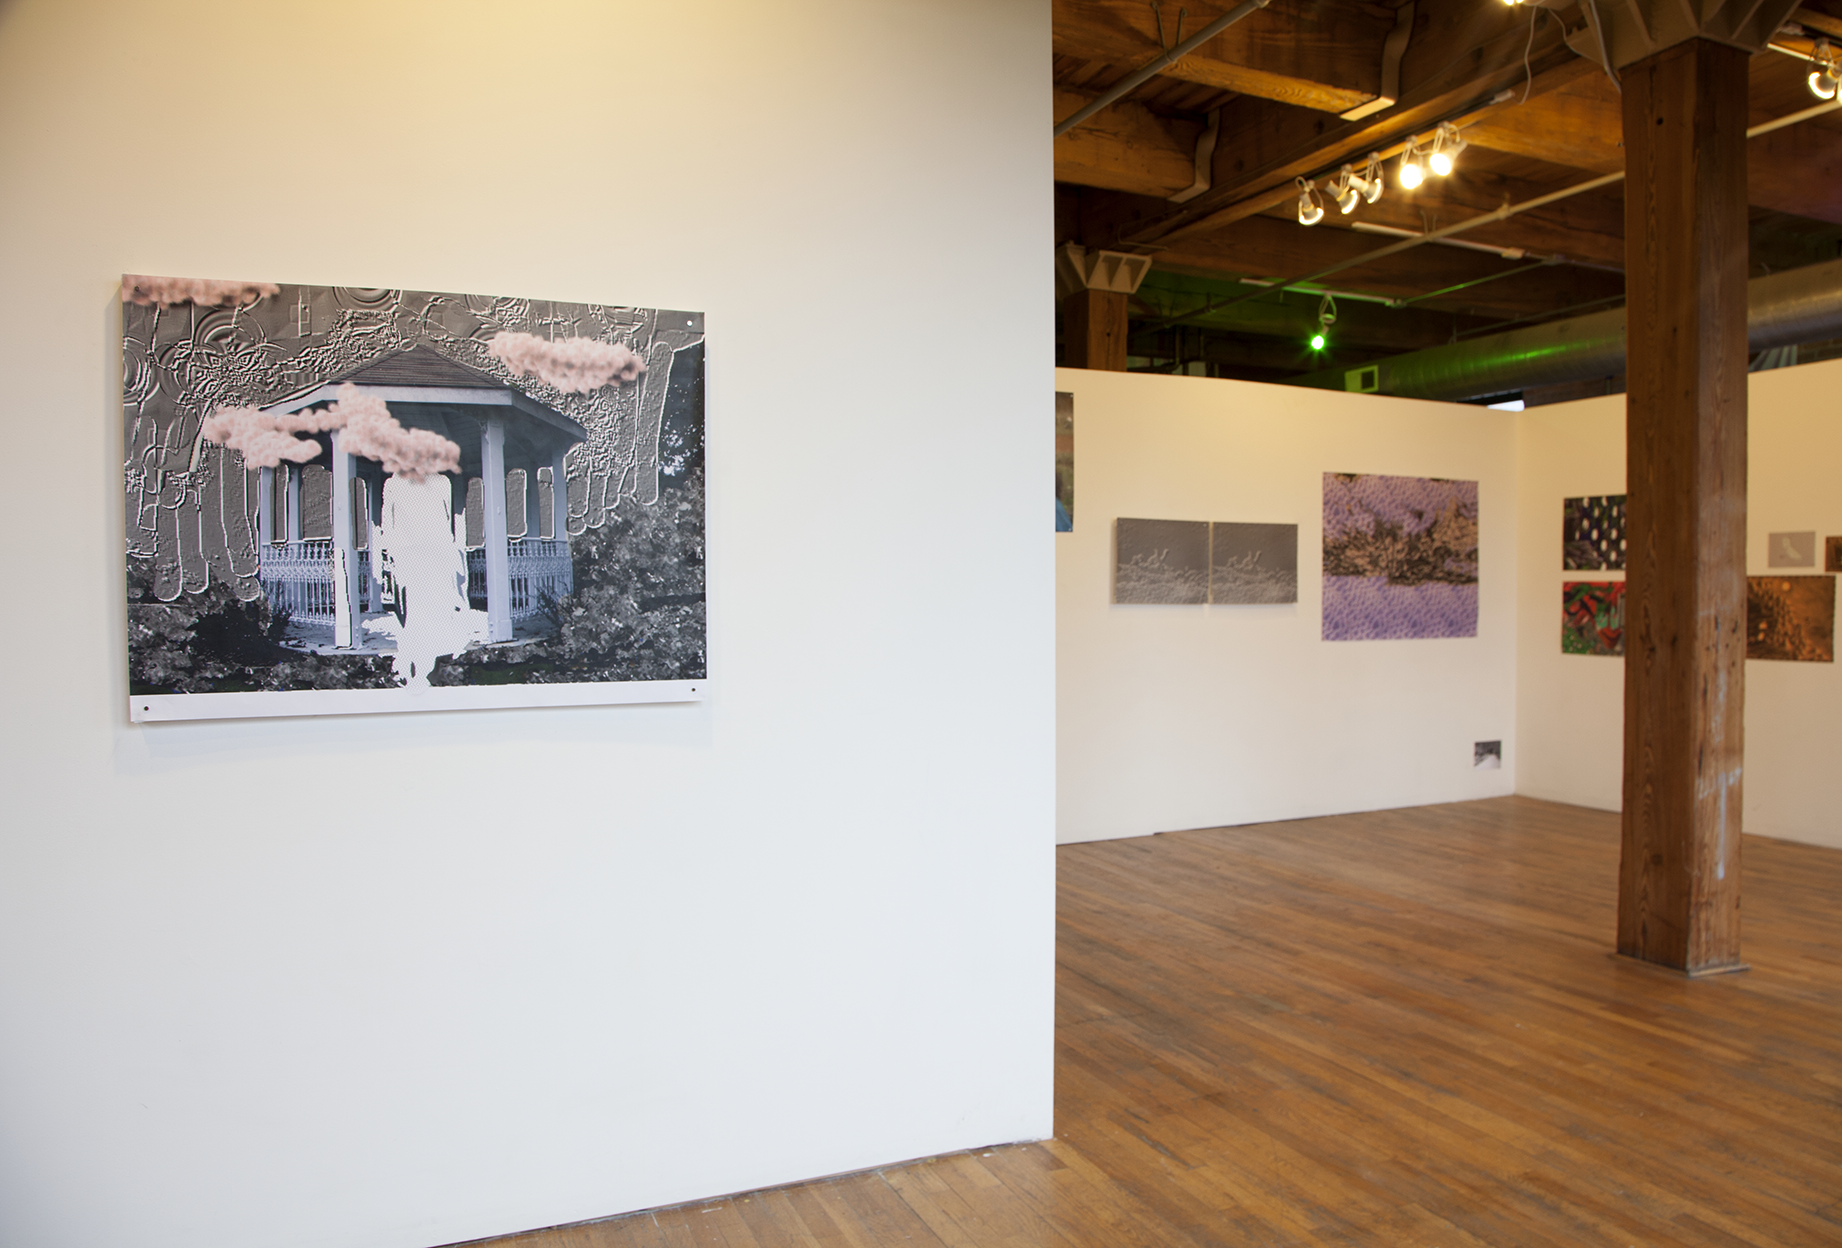 Installation view of many large scale prints hung on white walls in a gallery